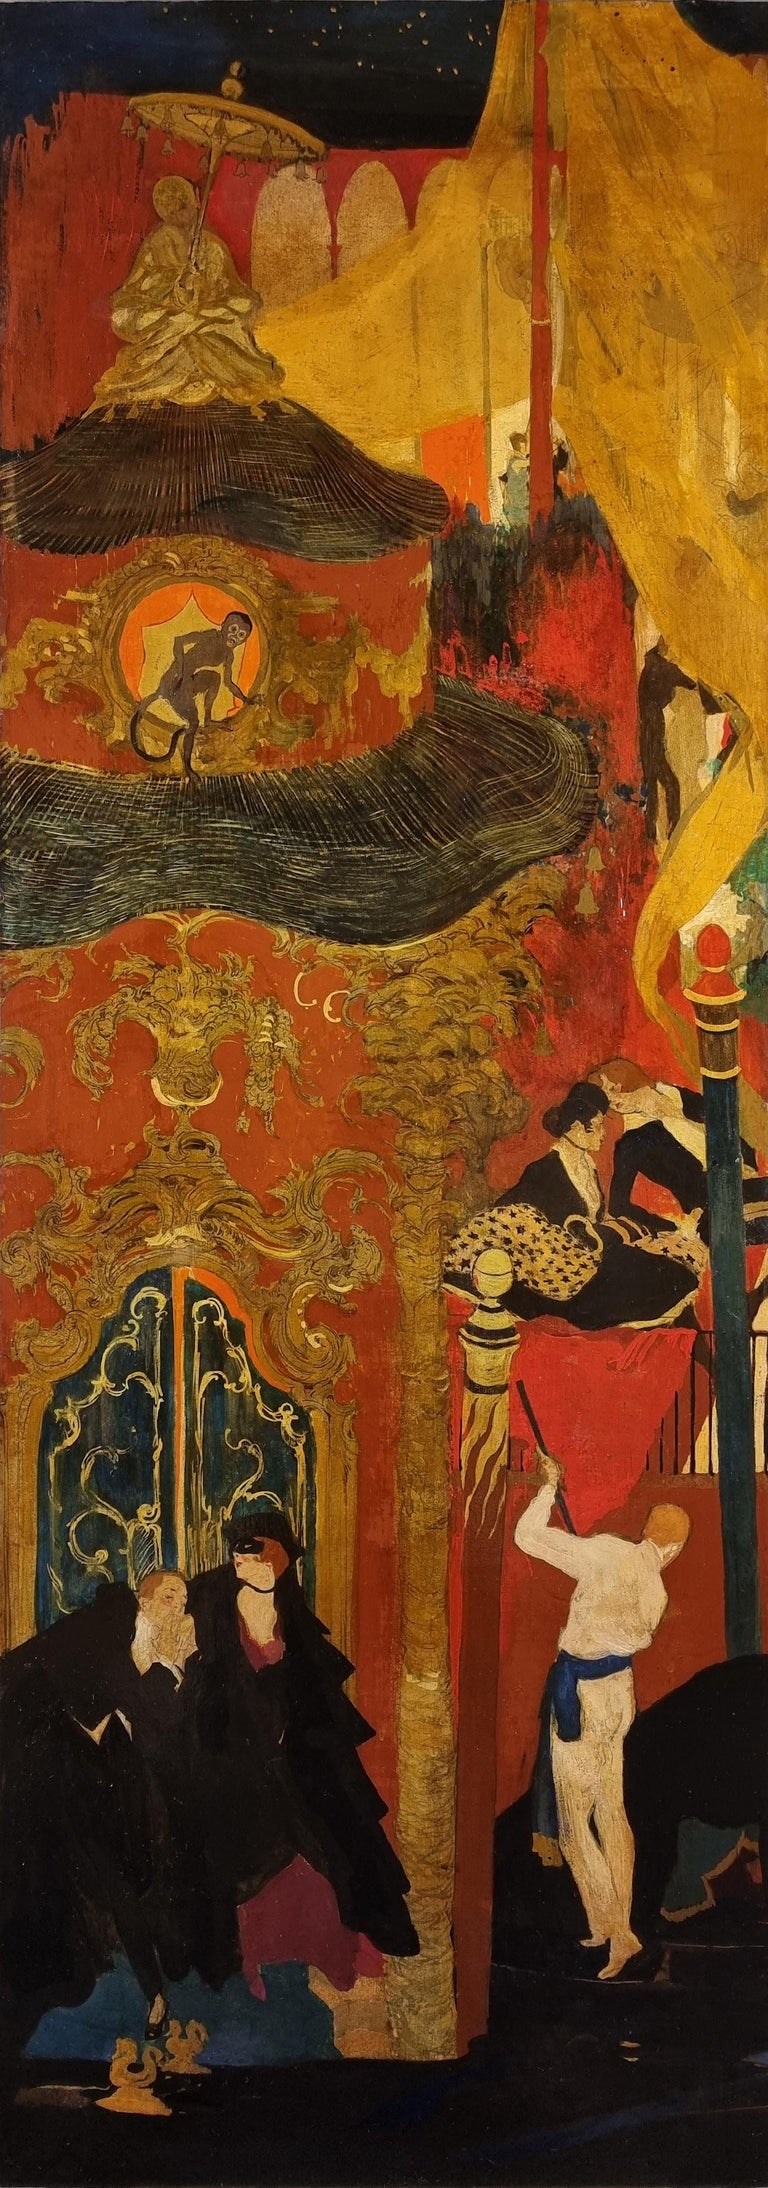 Déco venetian carnival party hosted by Luisa Casati triptych, Etienne Drian - Painting by Adrian Etienne Drian